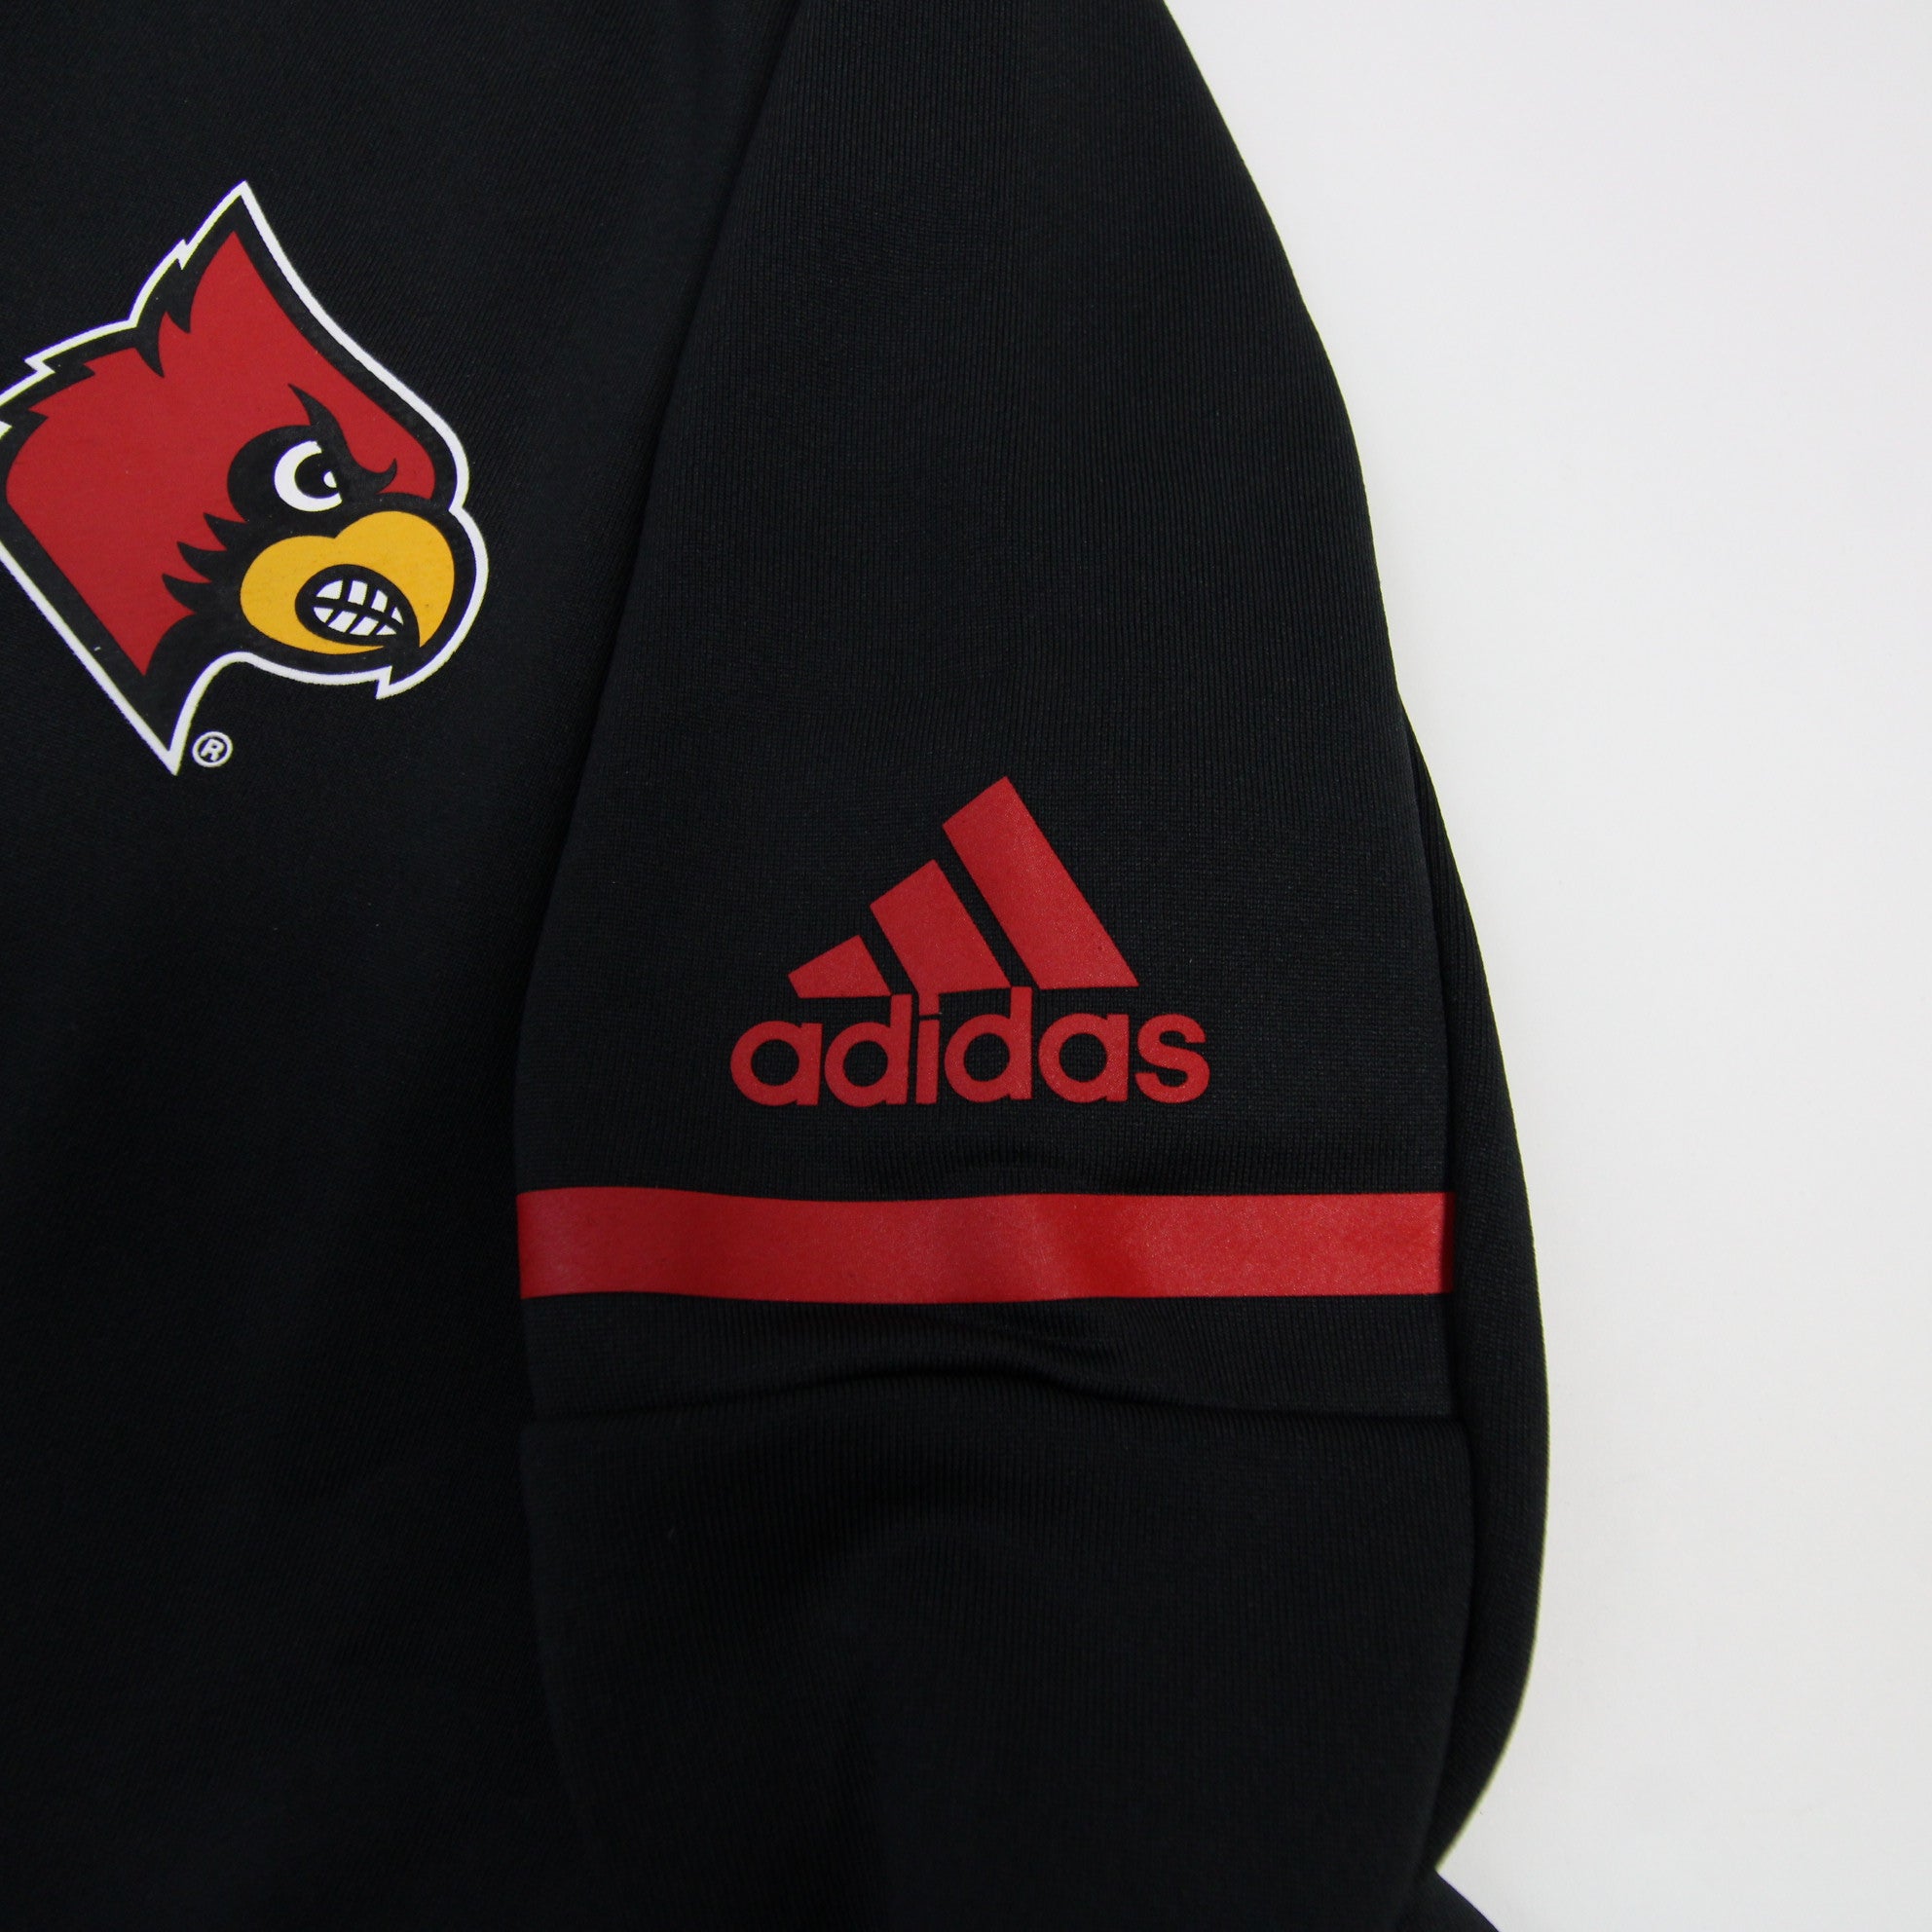 Adidas Louisville Cardinals Climaproof jacket Size M - $40 - From Valerie